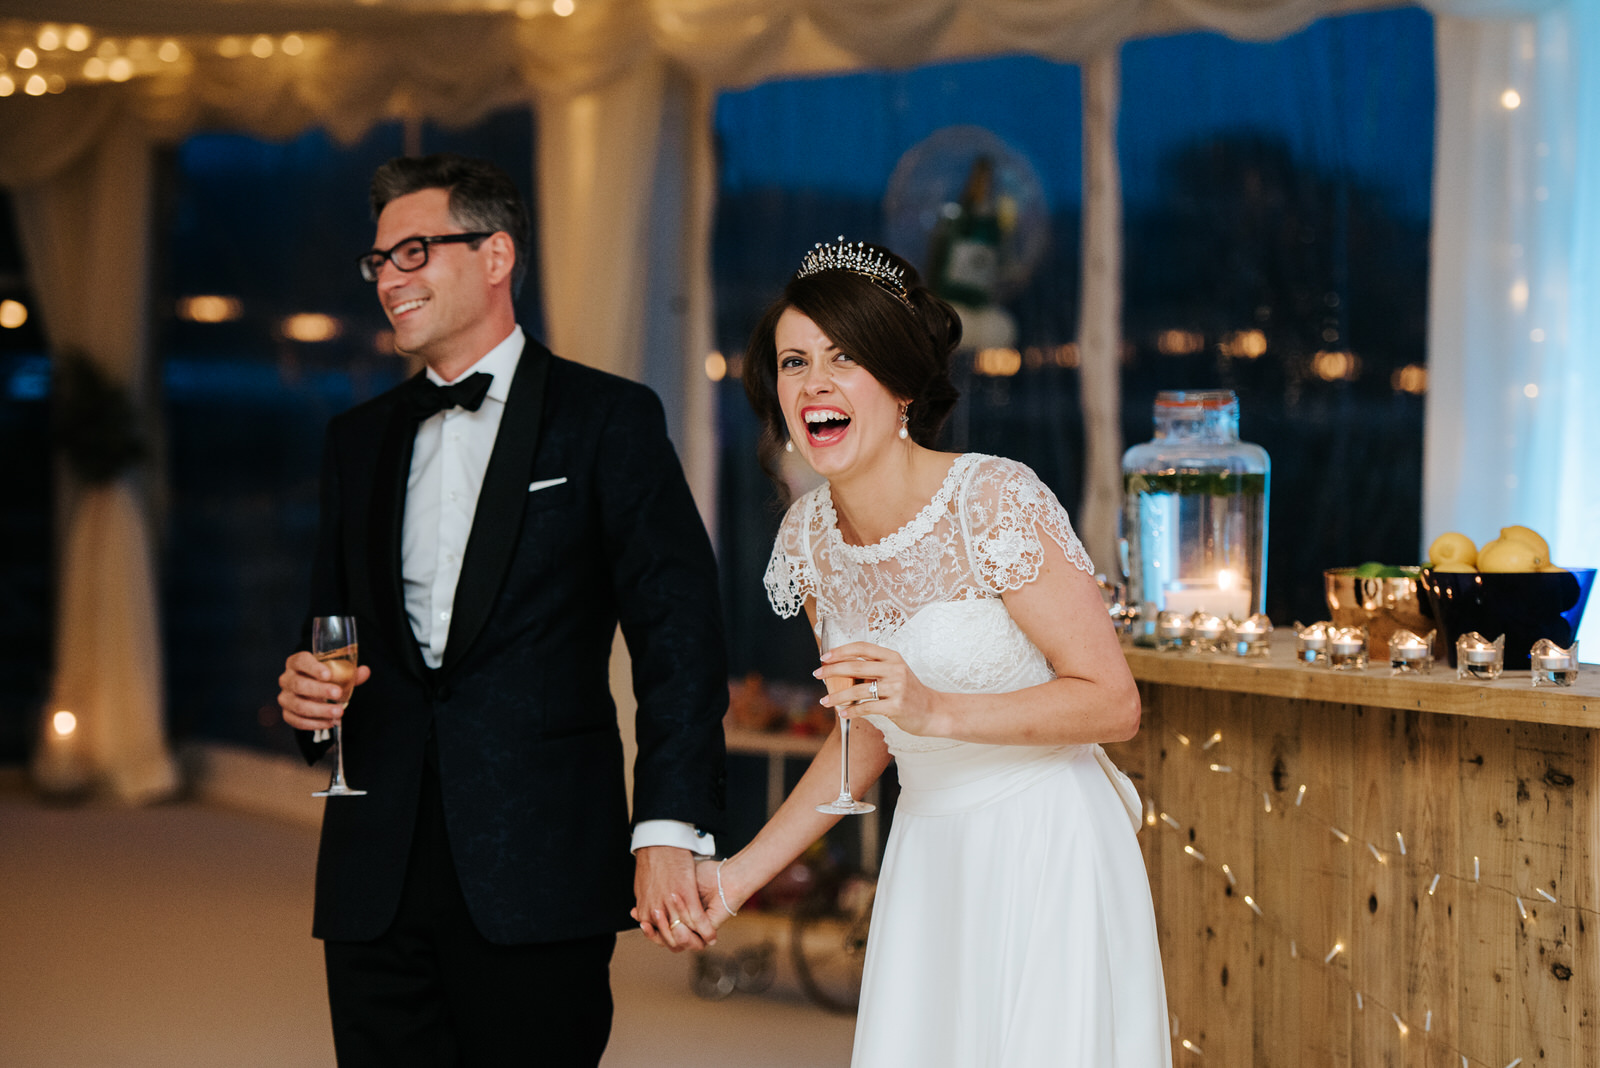 Bride laughs as other speeches are delivered